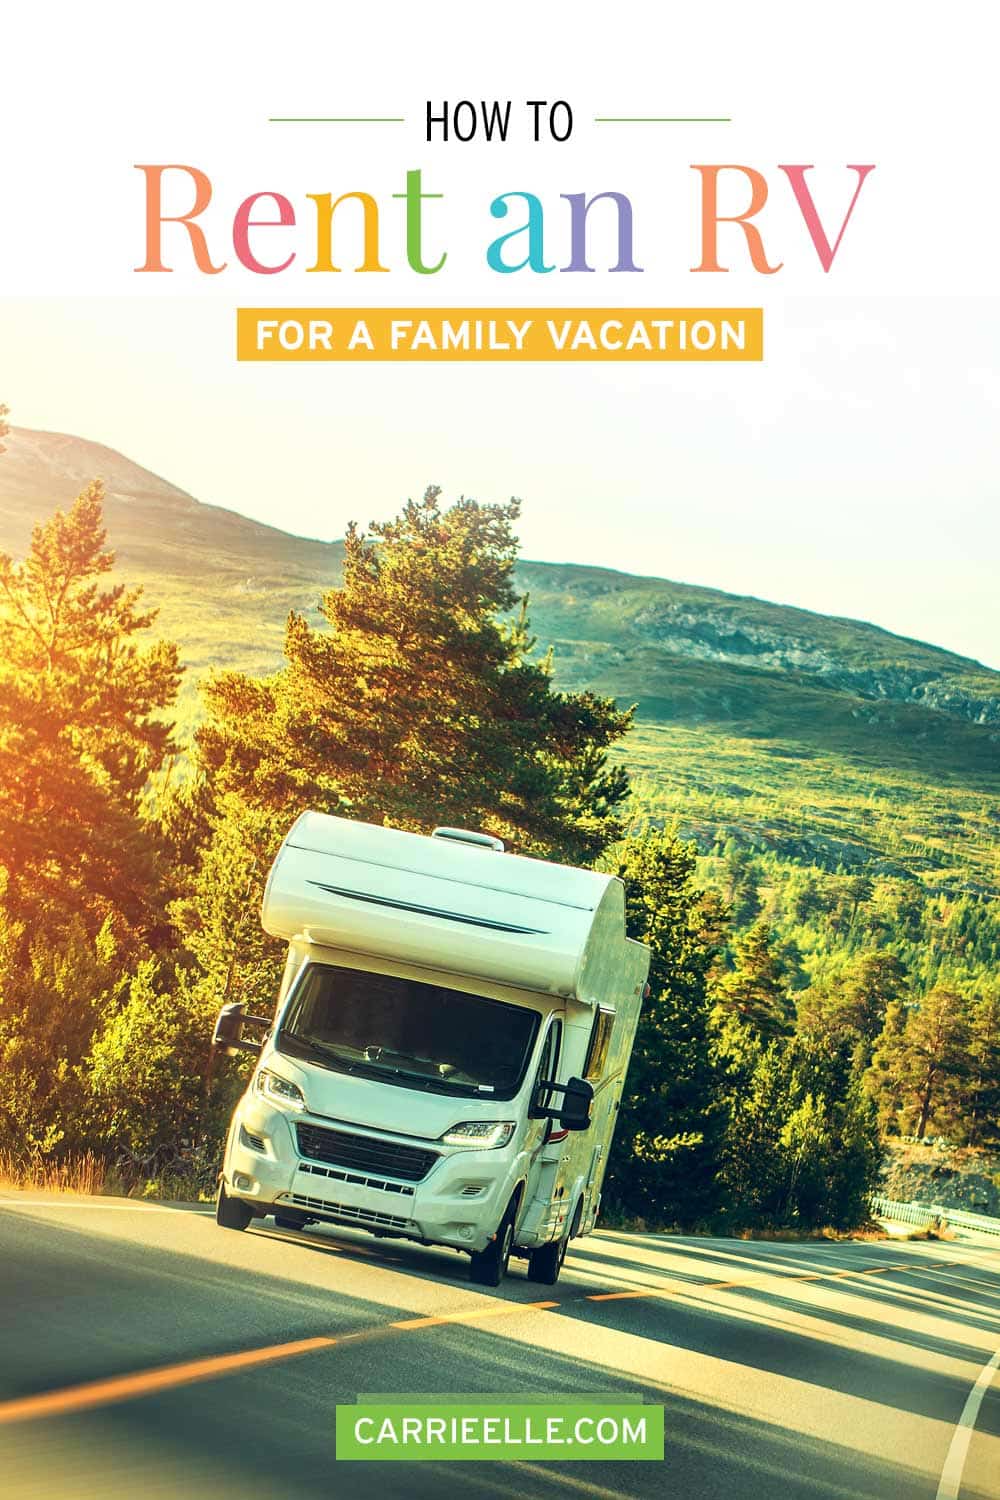 How to Rent an RV CarrieElle.com